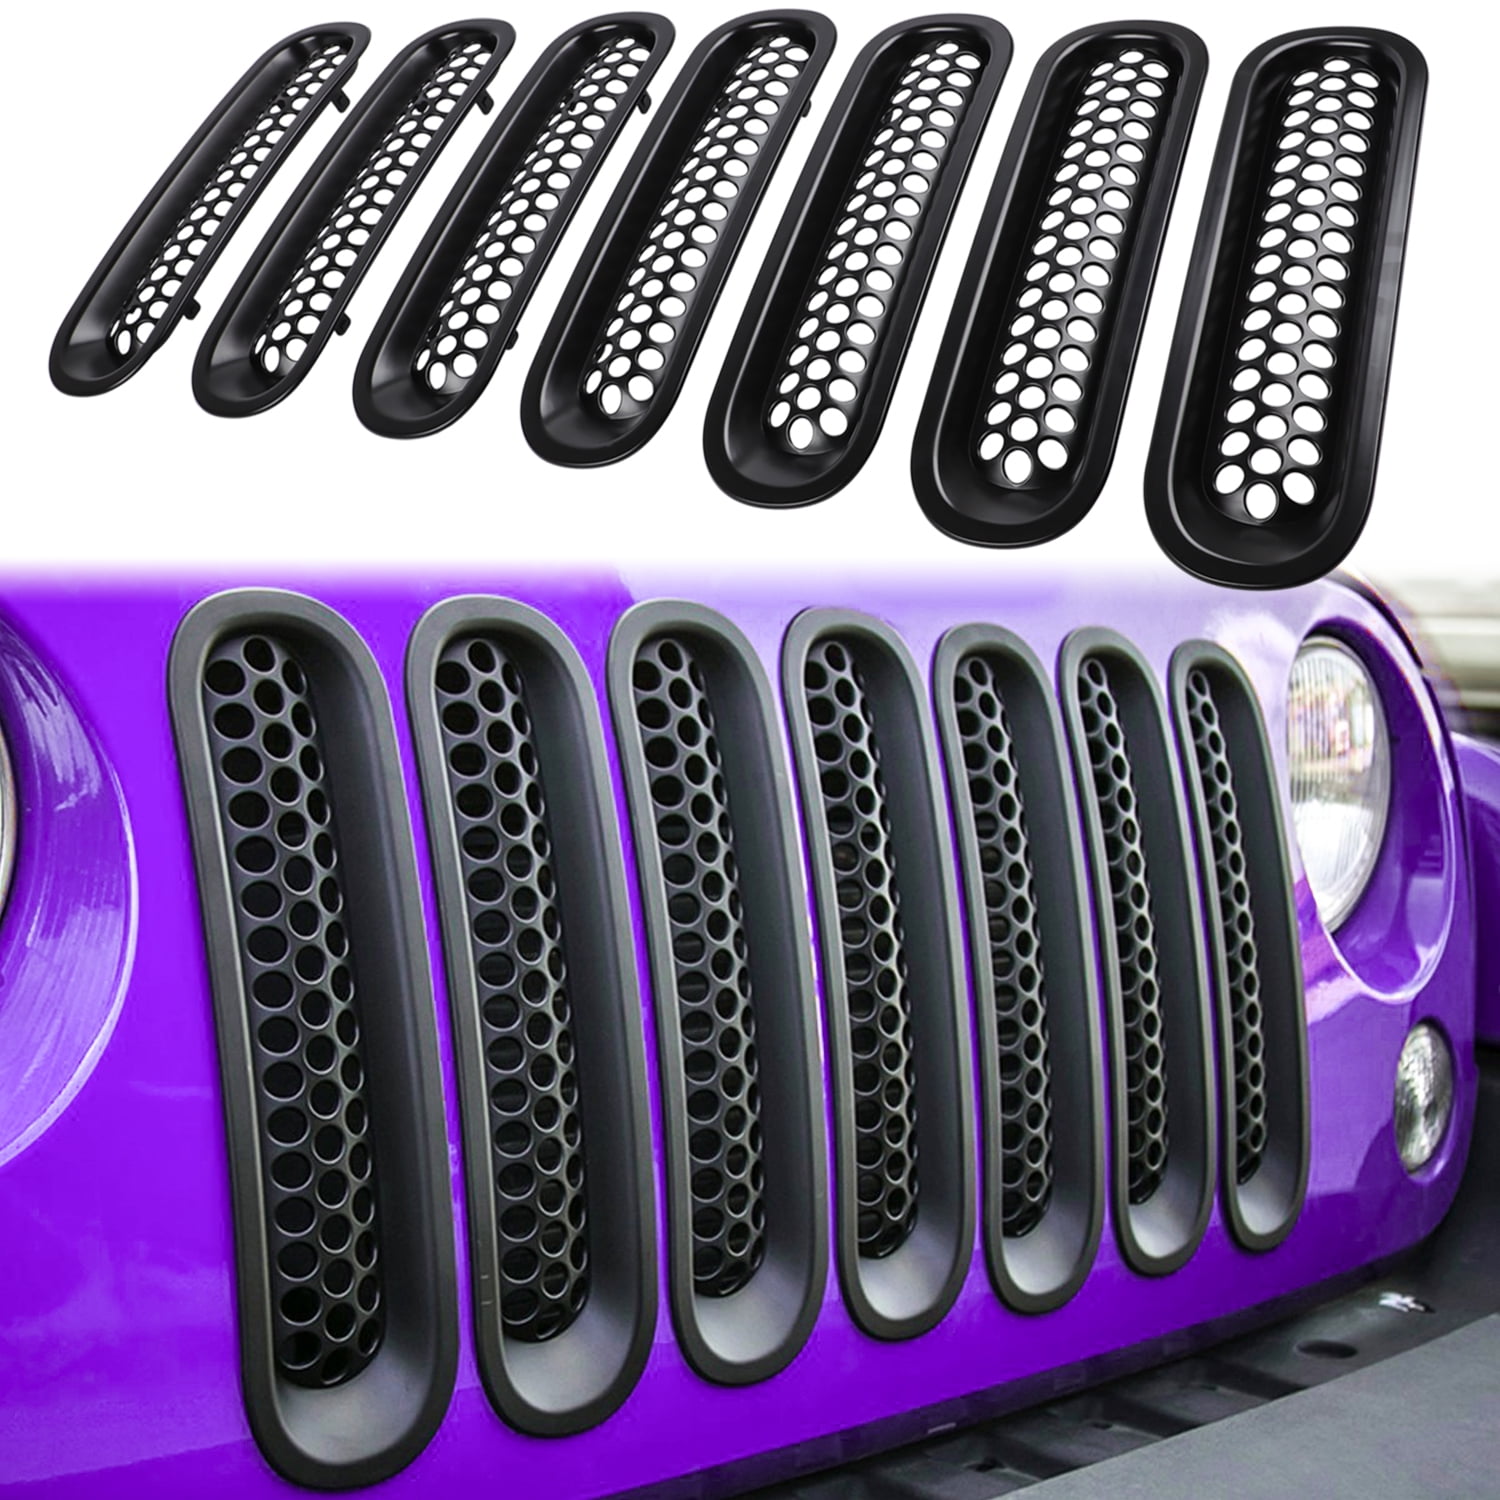 7PCS Front Grill Mesh Inserts Clip-in Grille Guard for 2007-2017 Jeep  Wrangler JK JKU Unlimited Rubicon Sahara (Matte Black) 